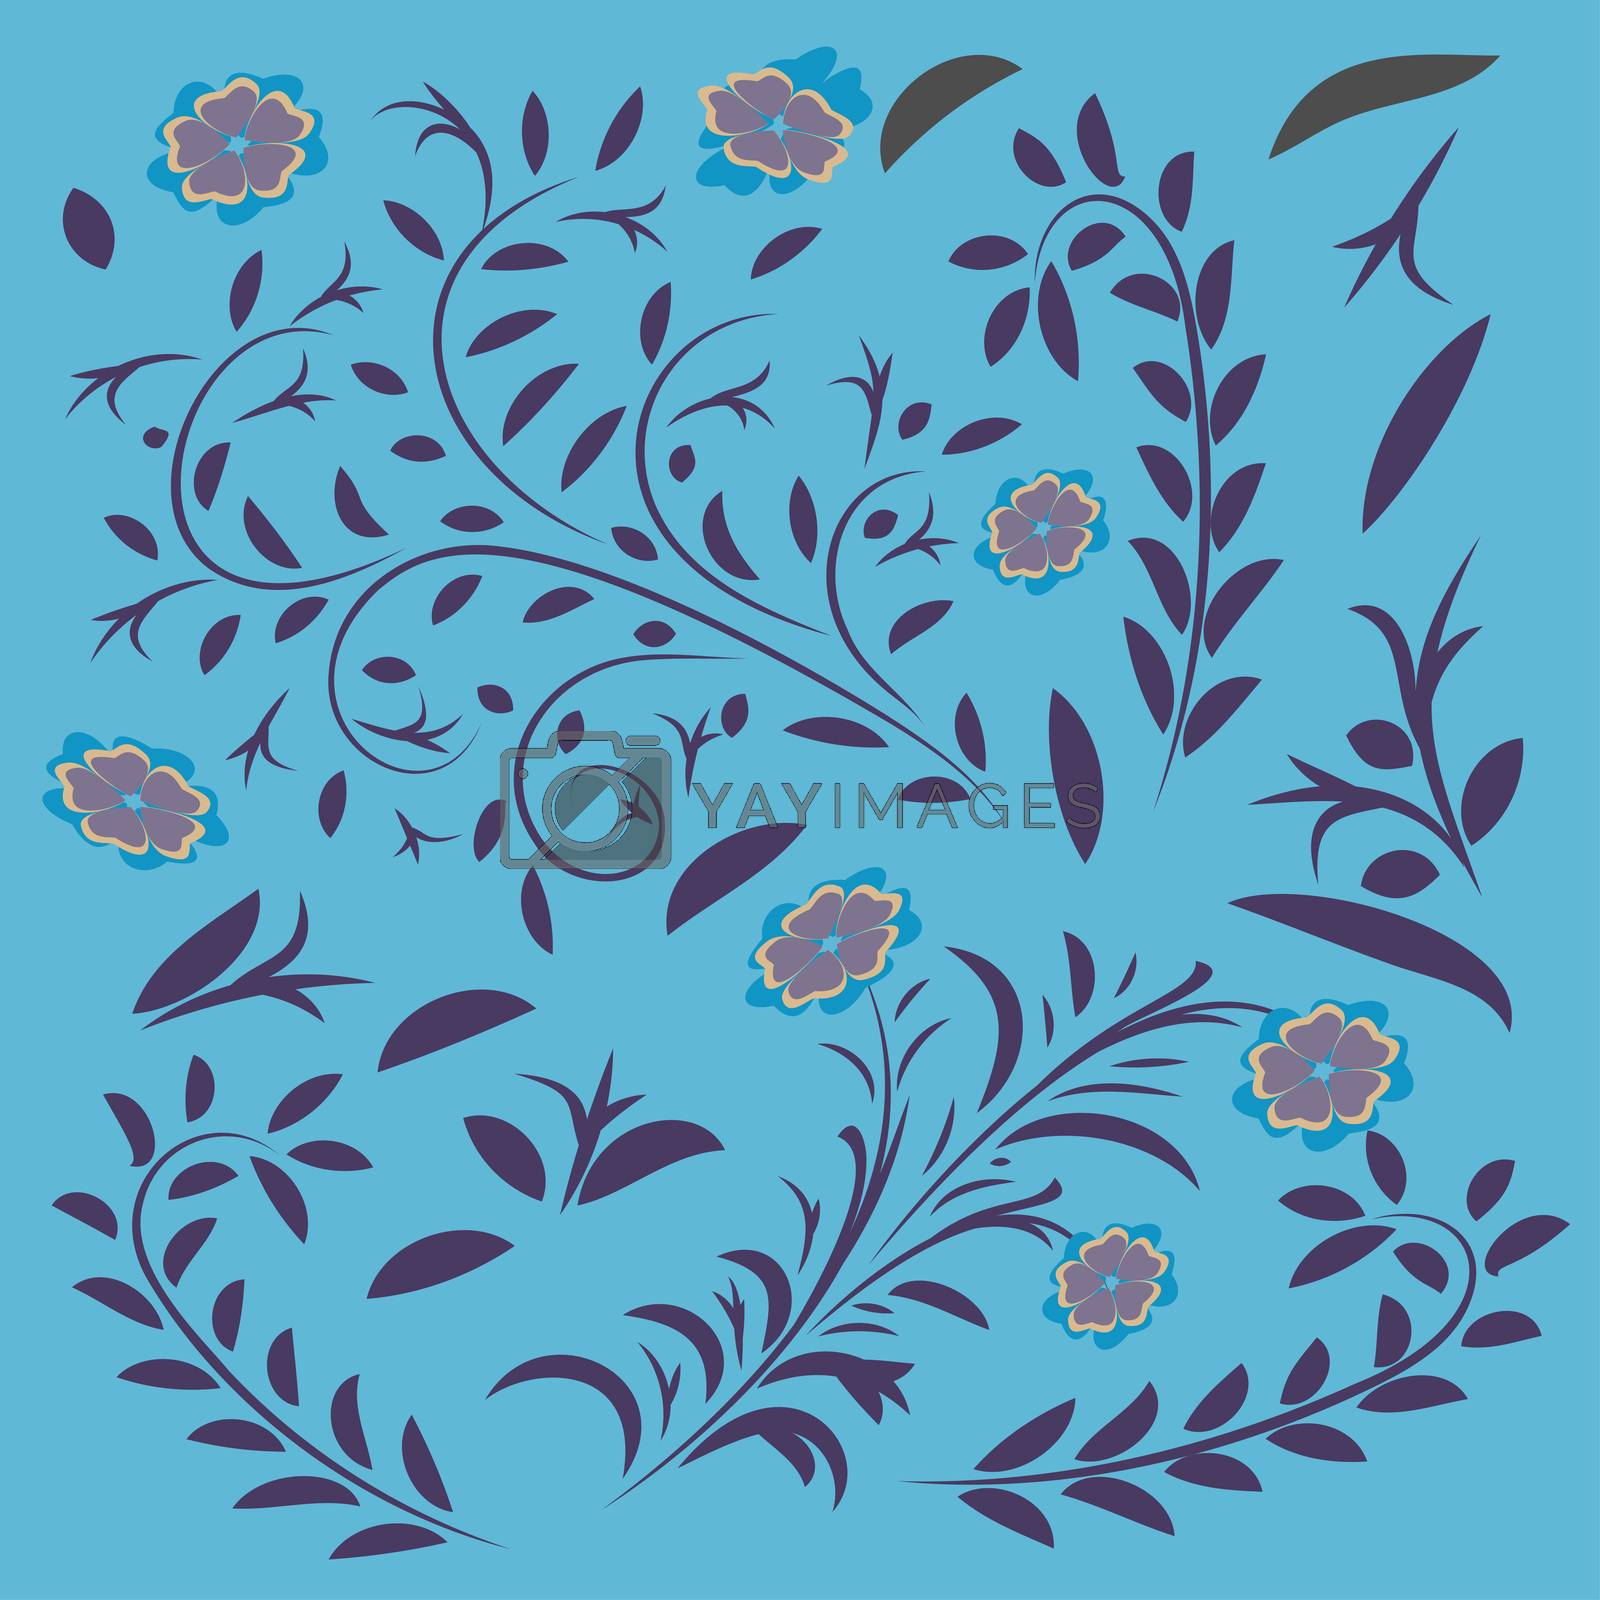 Royalty free image of seamless floral pattern backgrounds with leaves and flowers vector design by eskimos